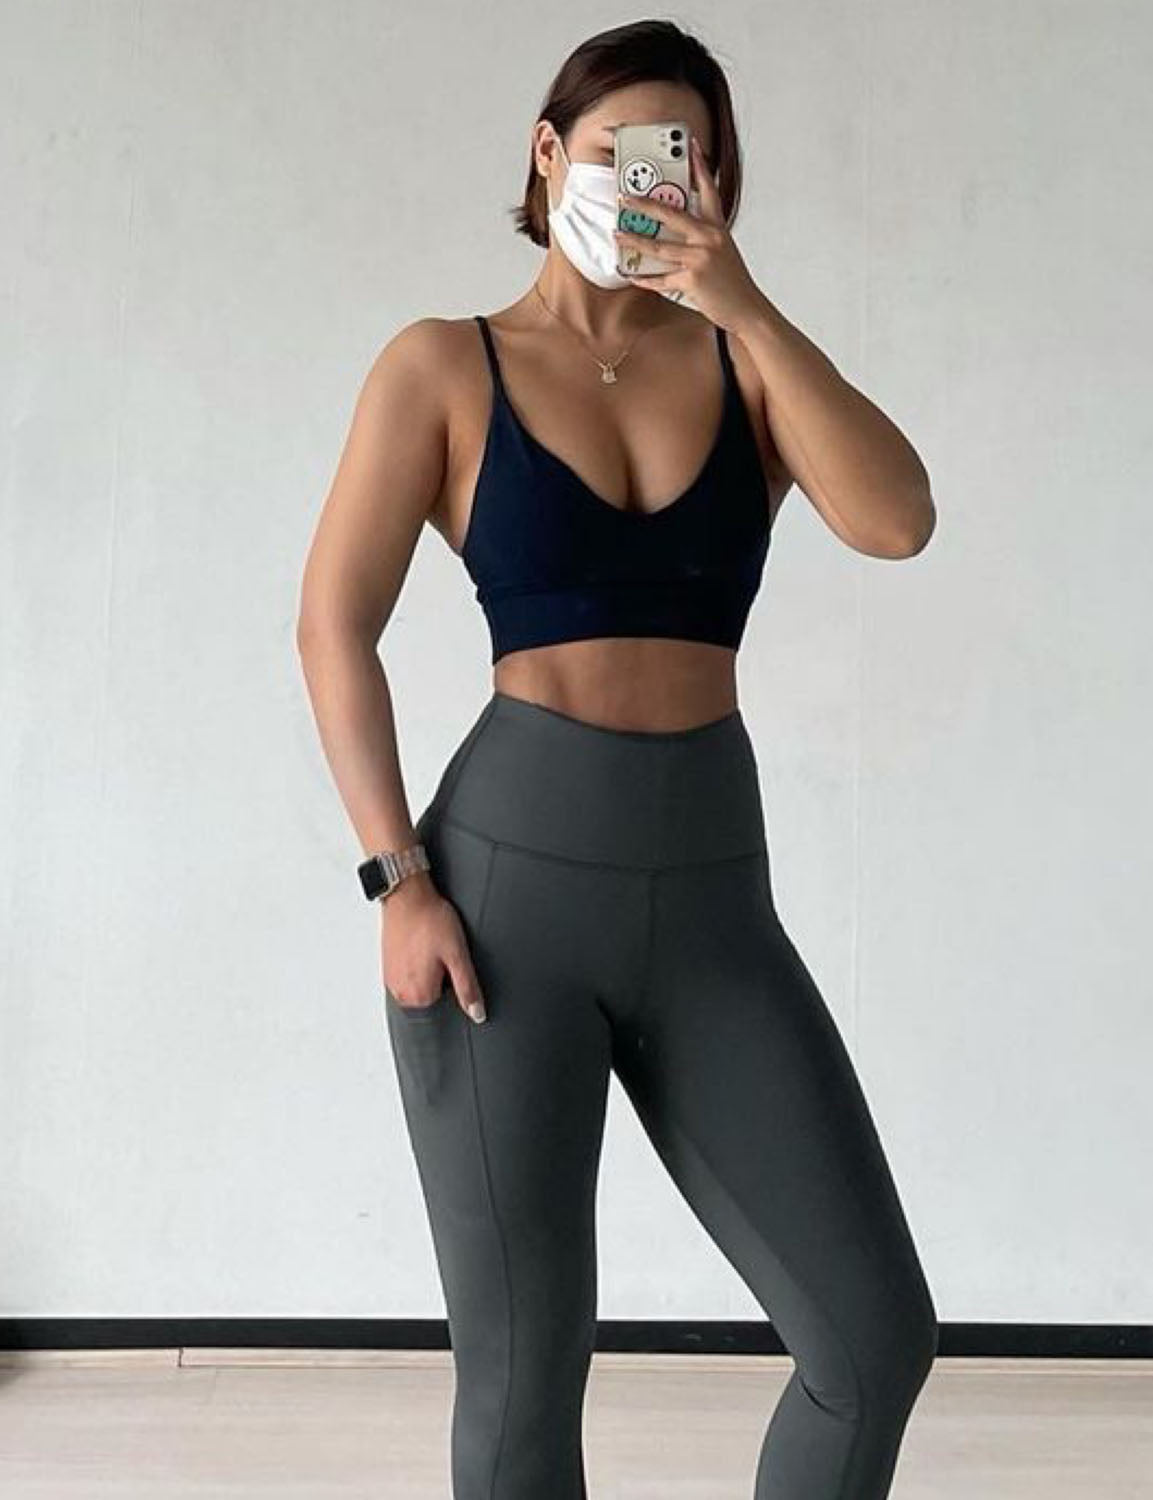 Hip Line Side Pockets Gym Pants shadowcharcoal Sexy Hip Line Side Pockets 75%Nylon/25%Spandex Fabric doesn't attract lint easily 4-way stretch No see-through Moisture-wicking Tummy control Inner pocket Two lengths